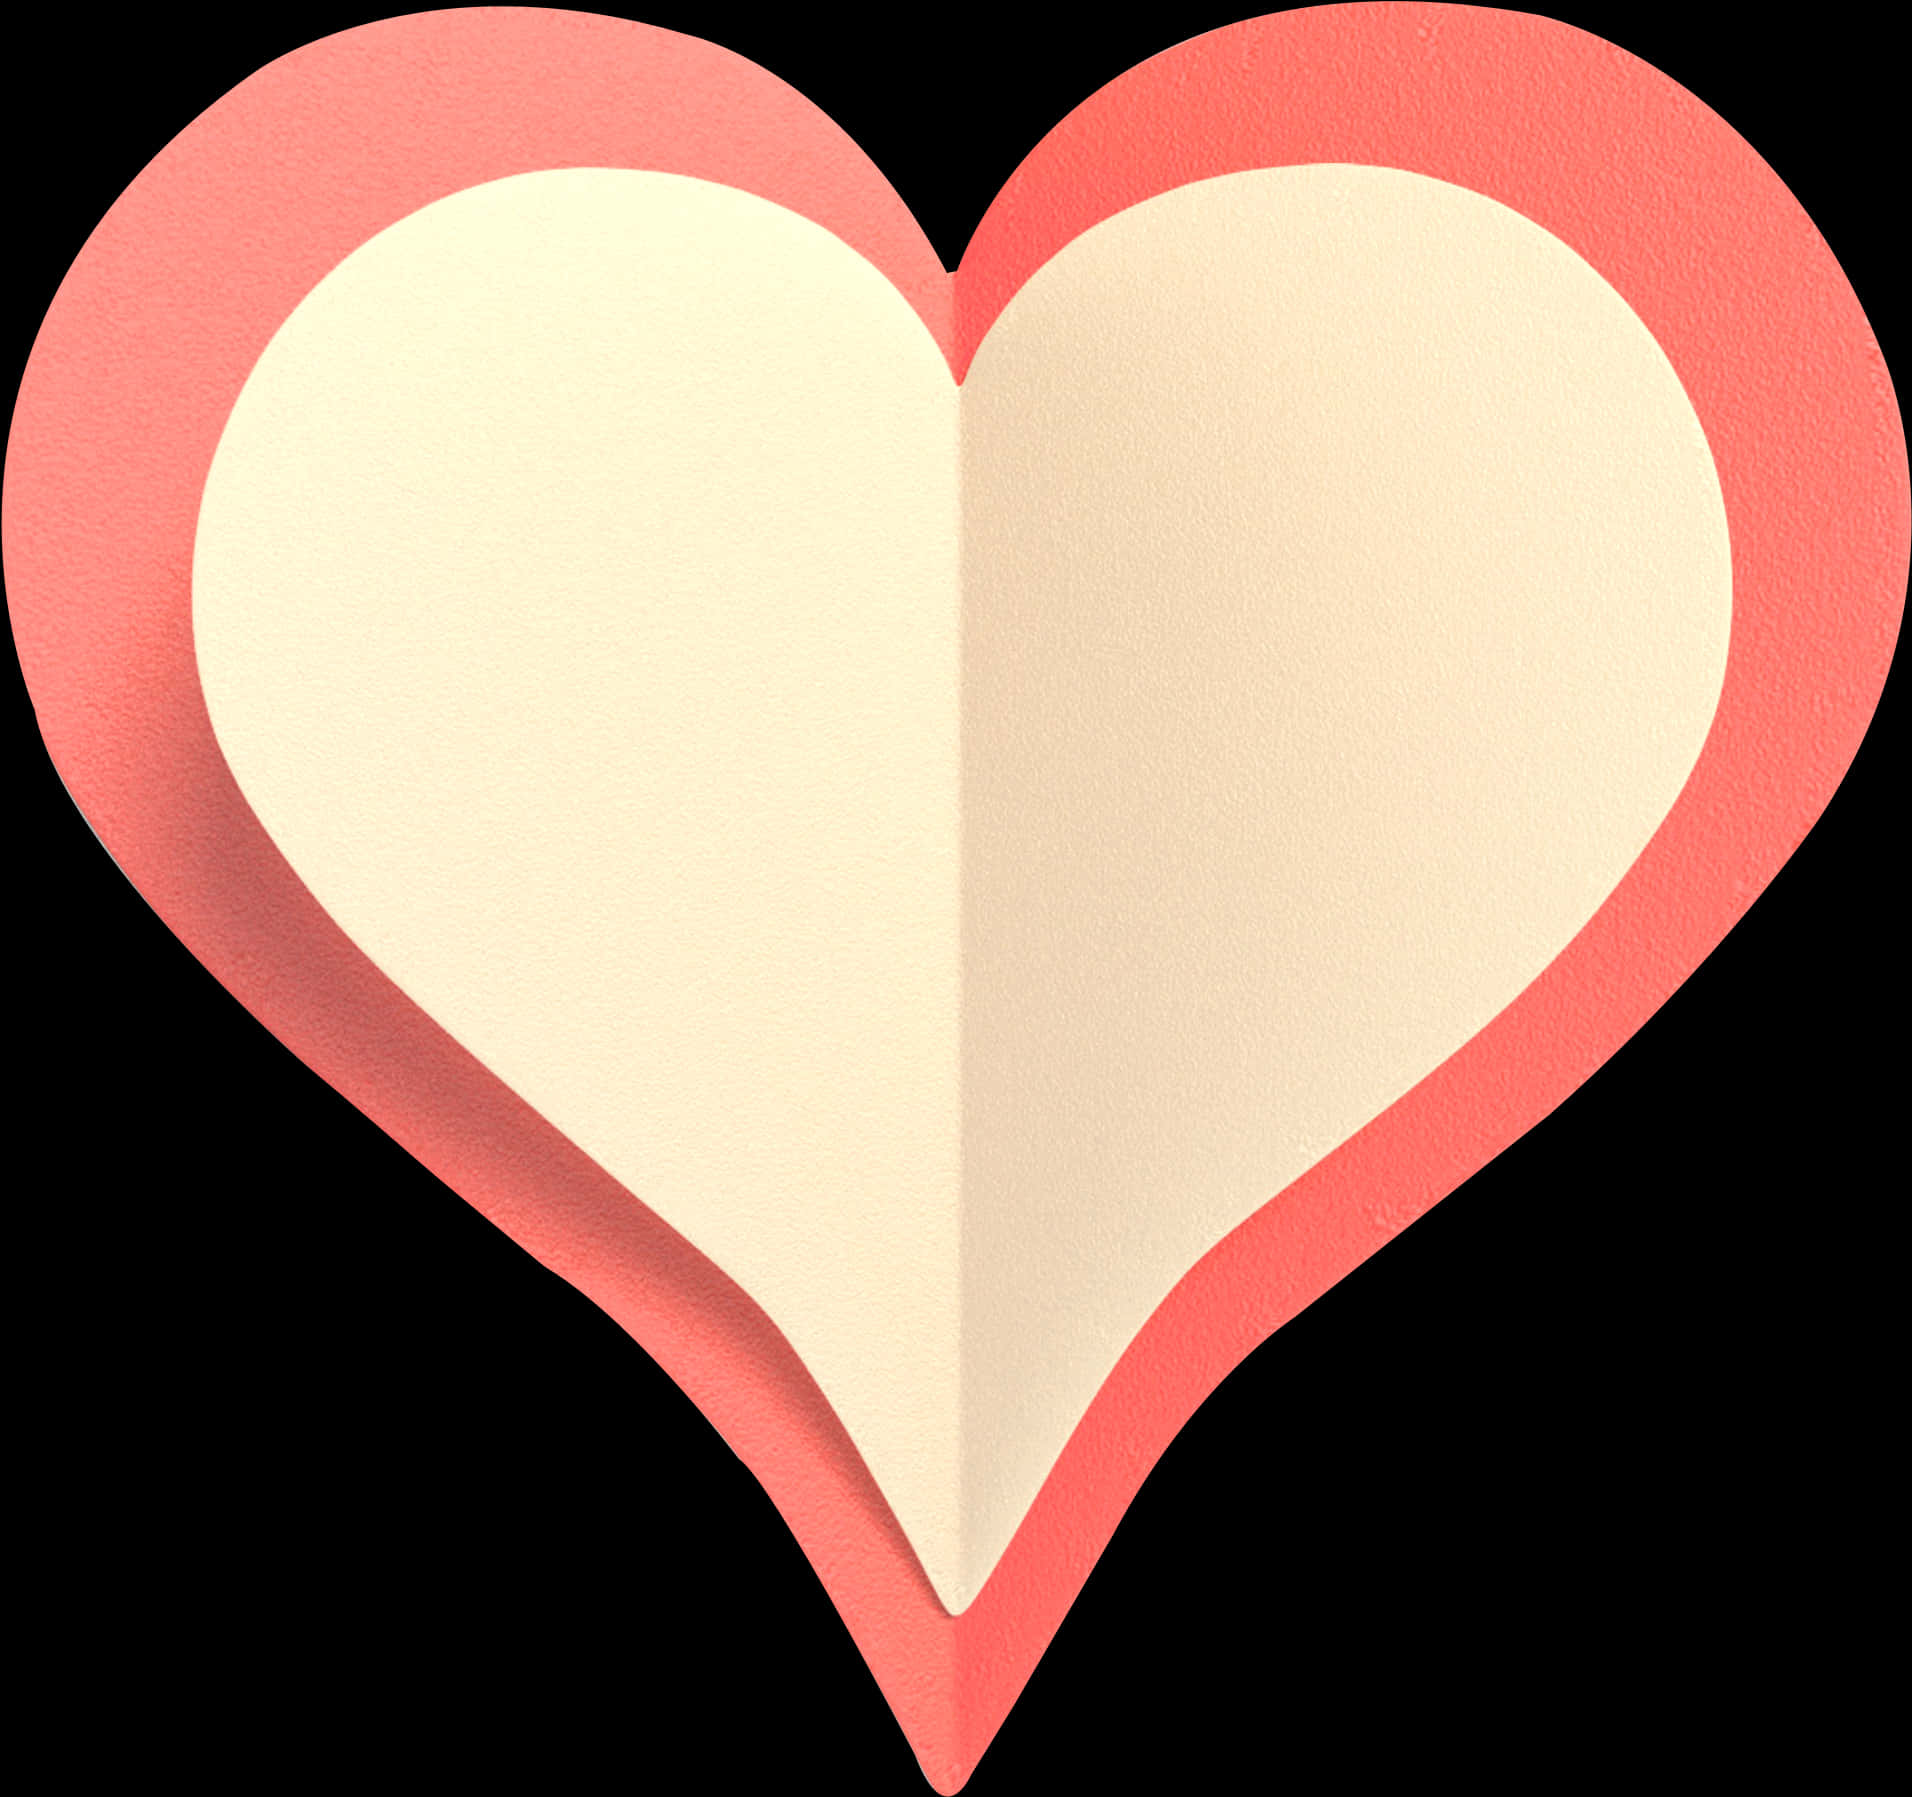 Paper Texture Heart Graphic PNG image